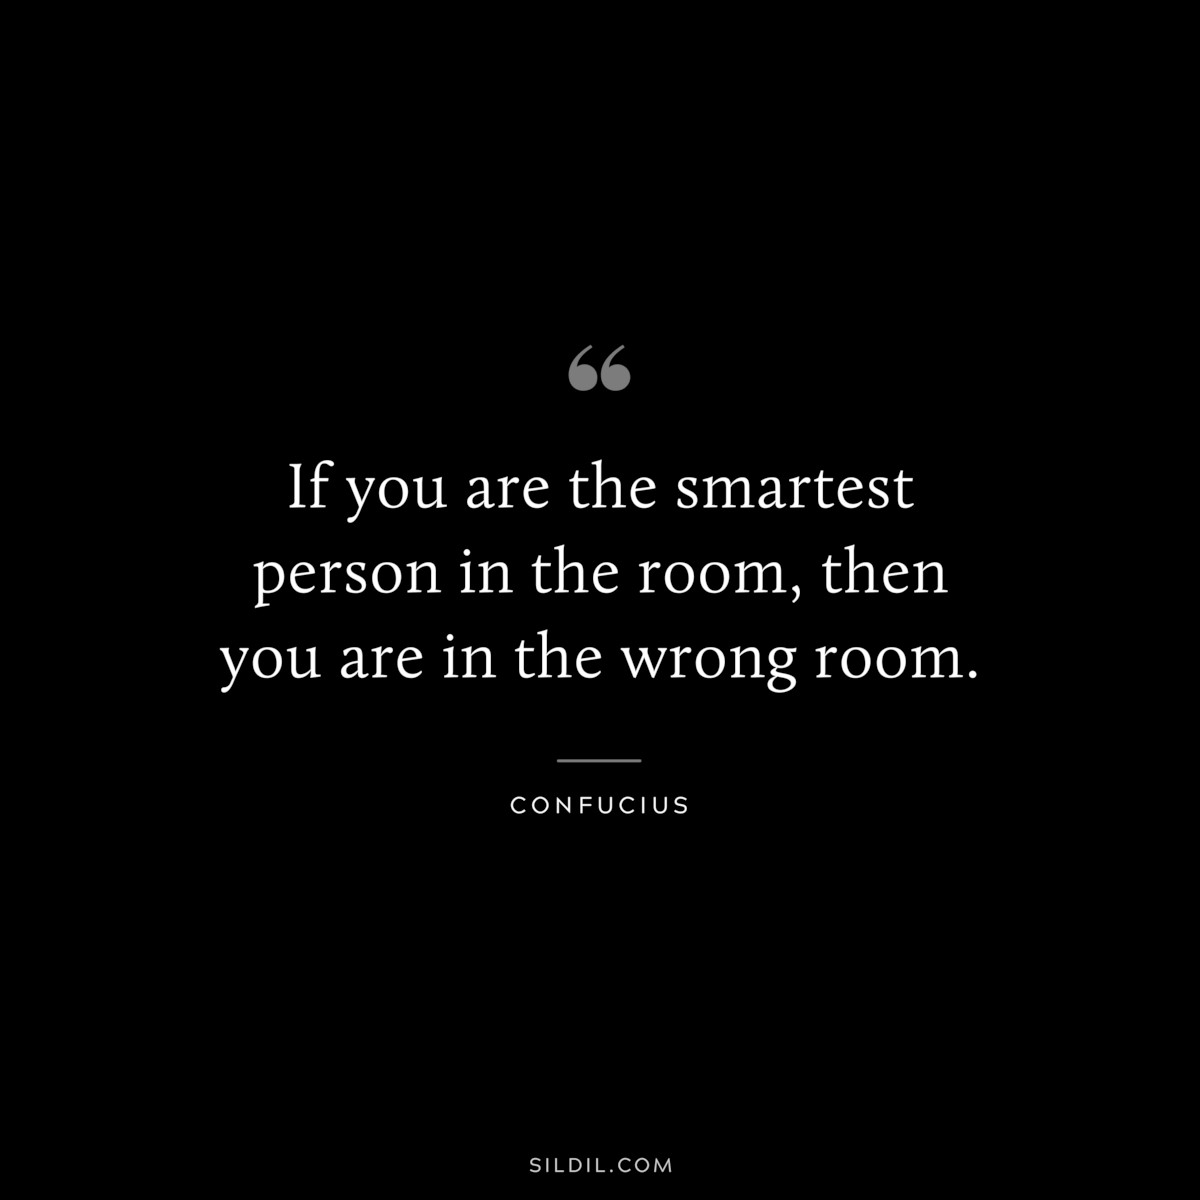 If you are the smartest person in the room, then you are in the wrong room. ― Confucius